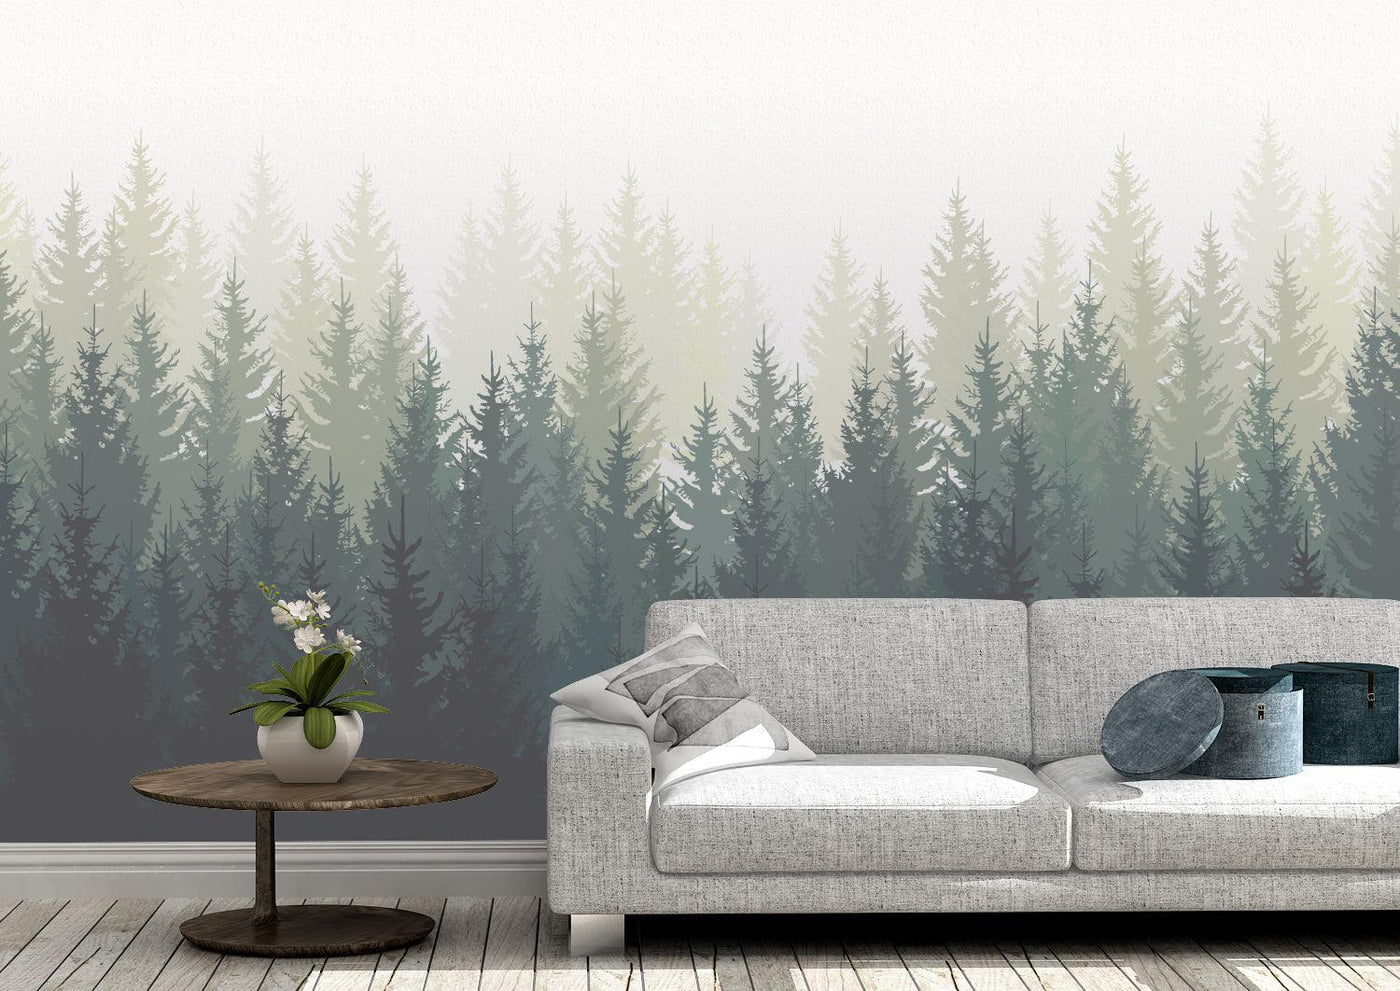 Taigs Bos Tree Wall Mural (m²)-Wall Decor-LANDSCAPE WALLPAPERS, MURALS, MURALS / WALLPAPERS, NON-WOVEN WALLPAPER-Forest Homes-Nature inspired decor-Nature decor